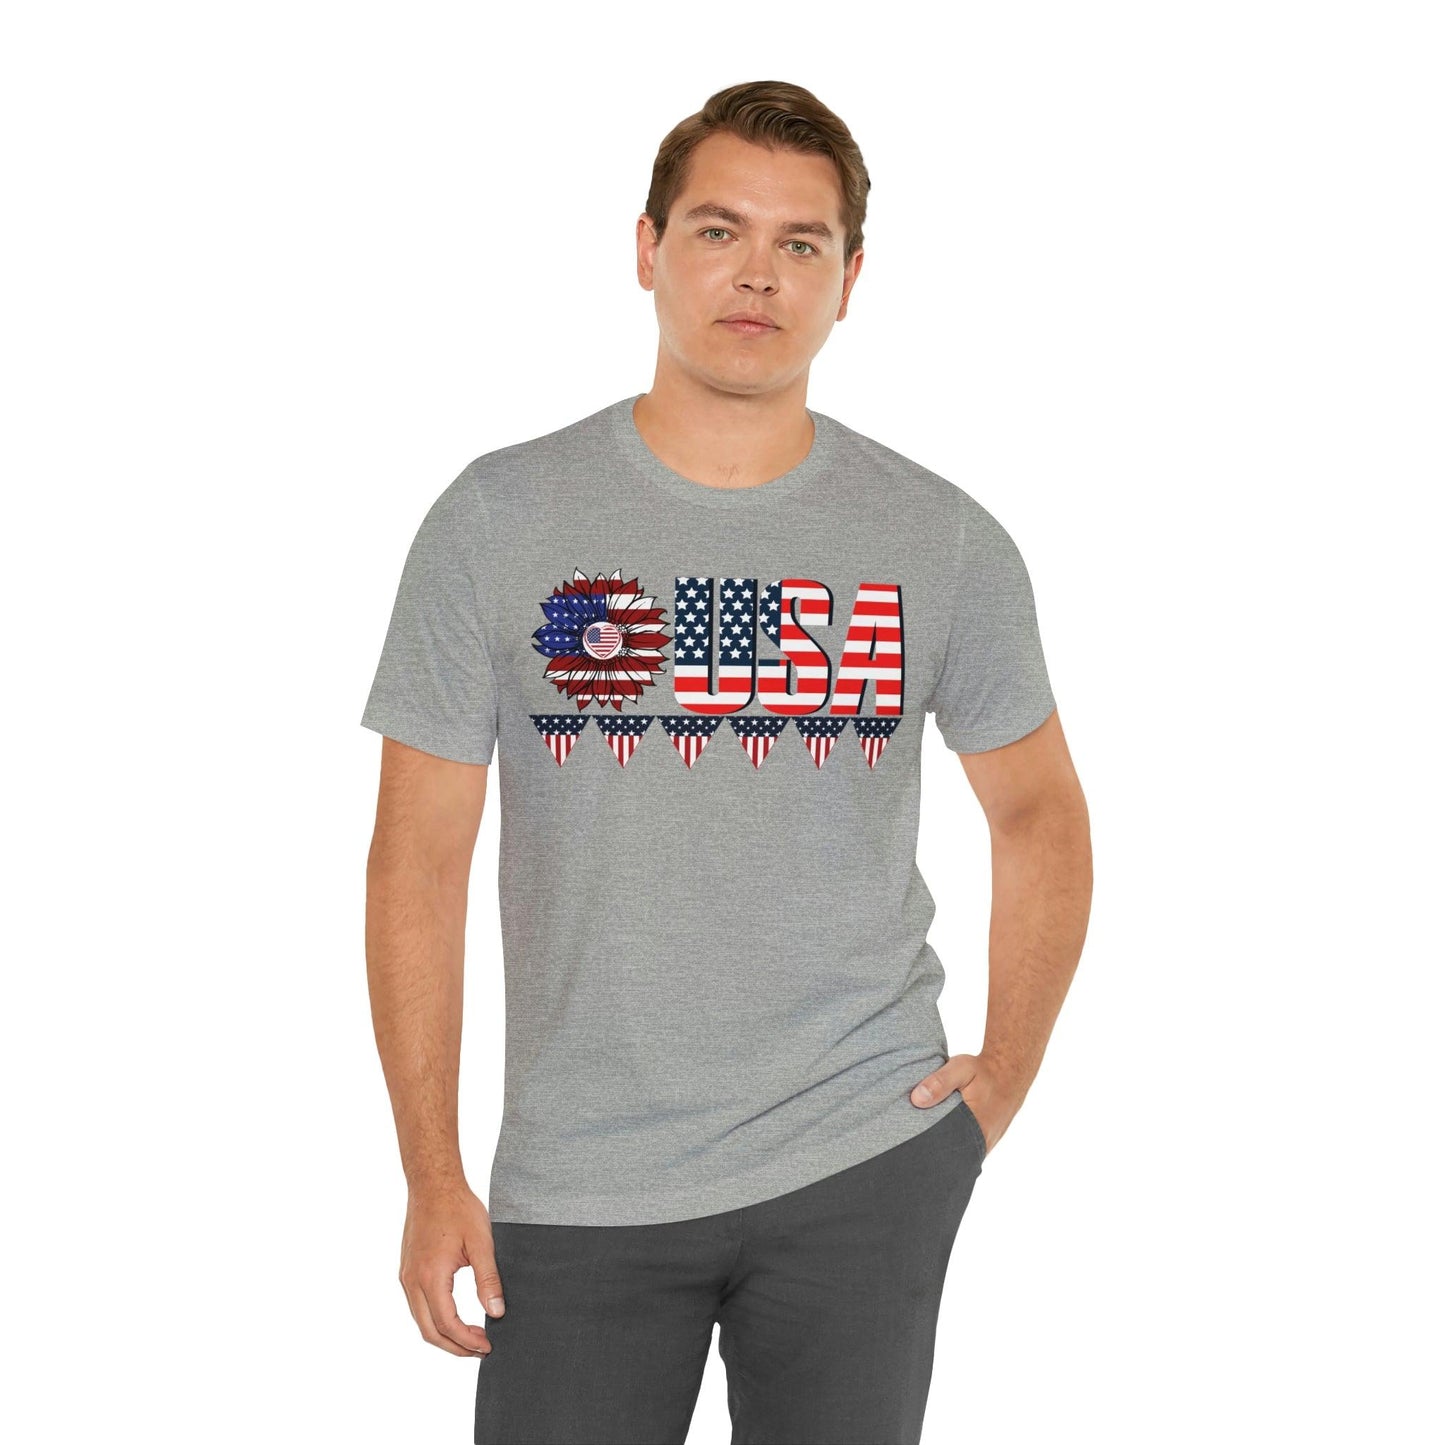 Flower USA American flag shirt, Red white and blue shirt, 4th of July shirt